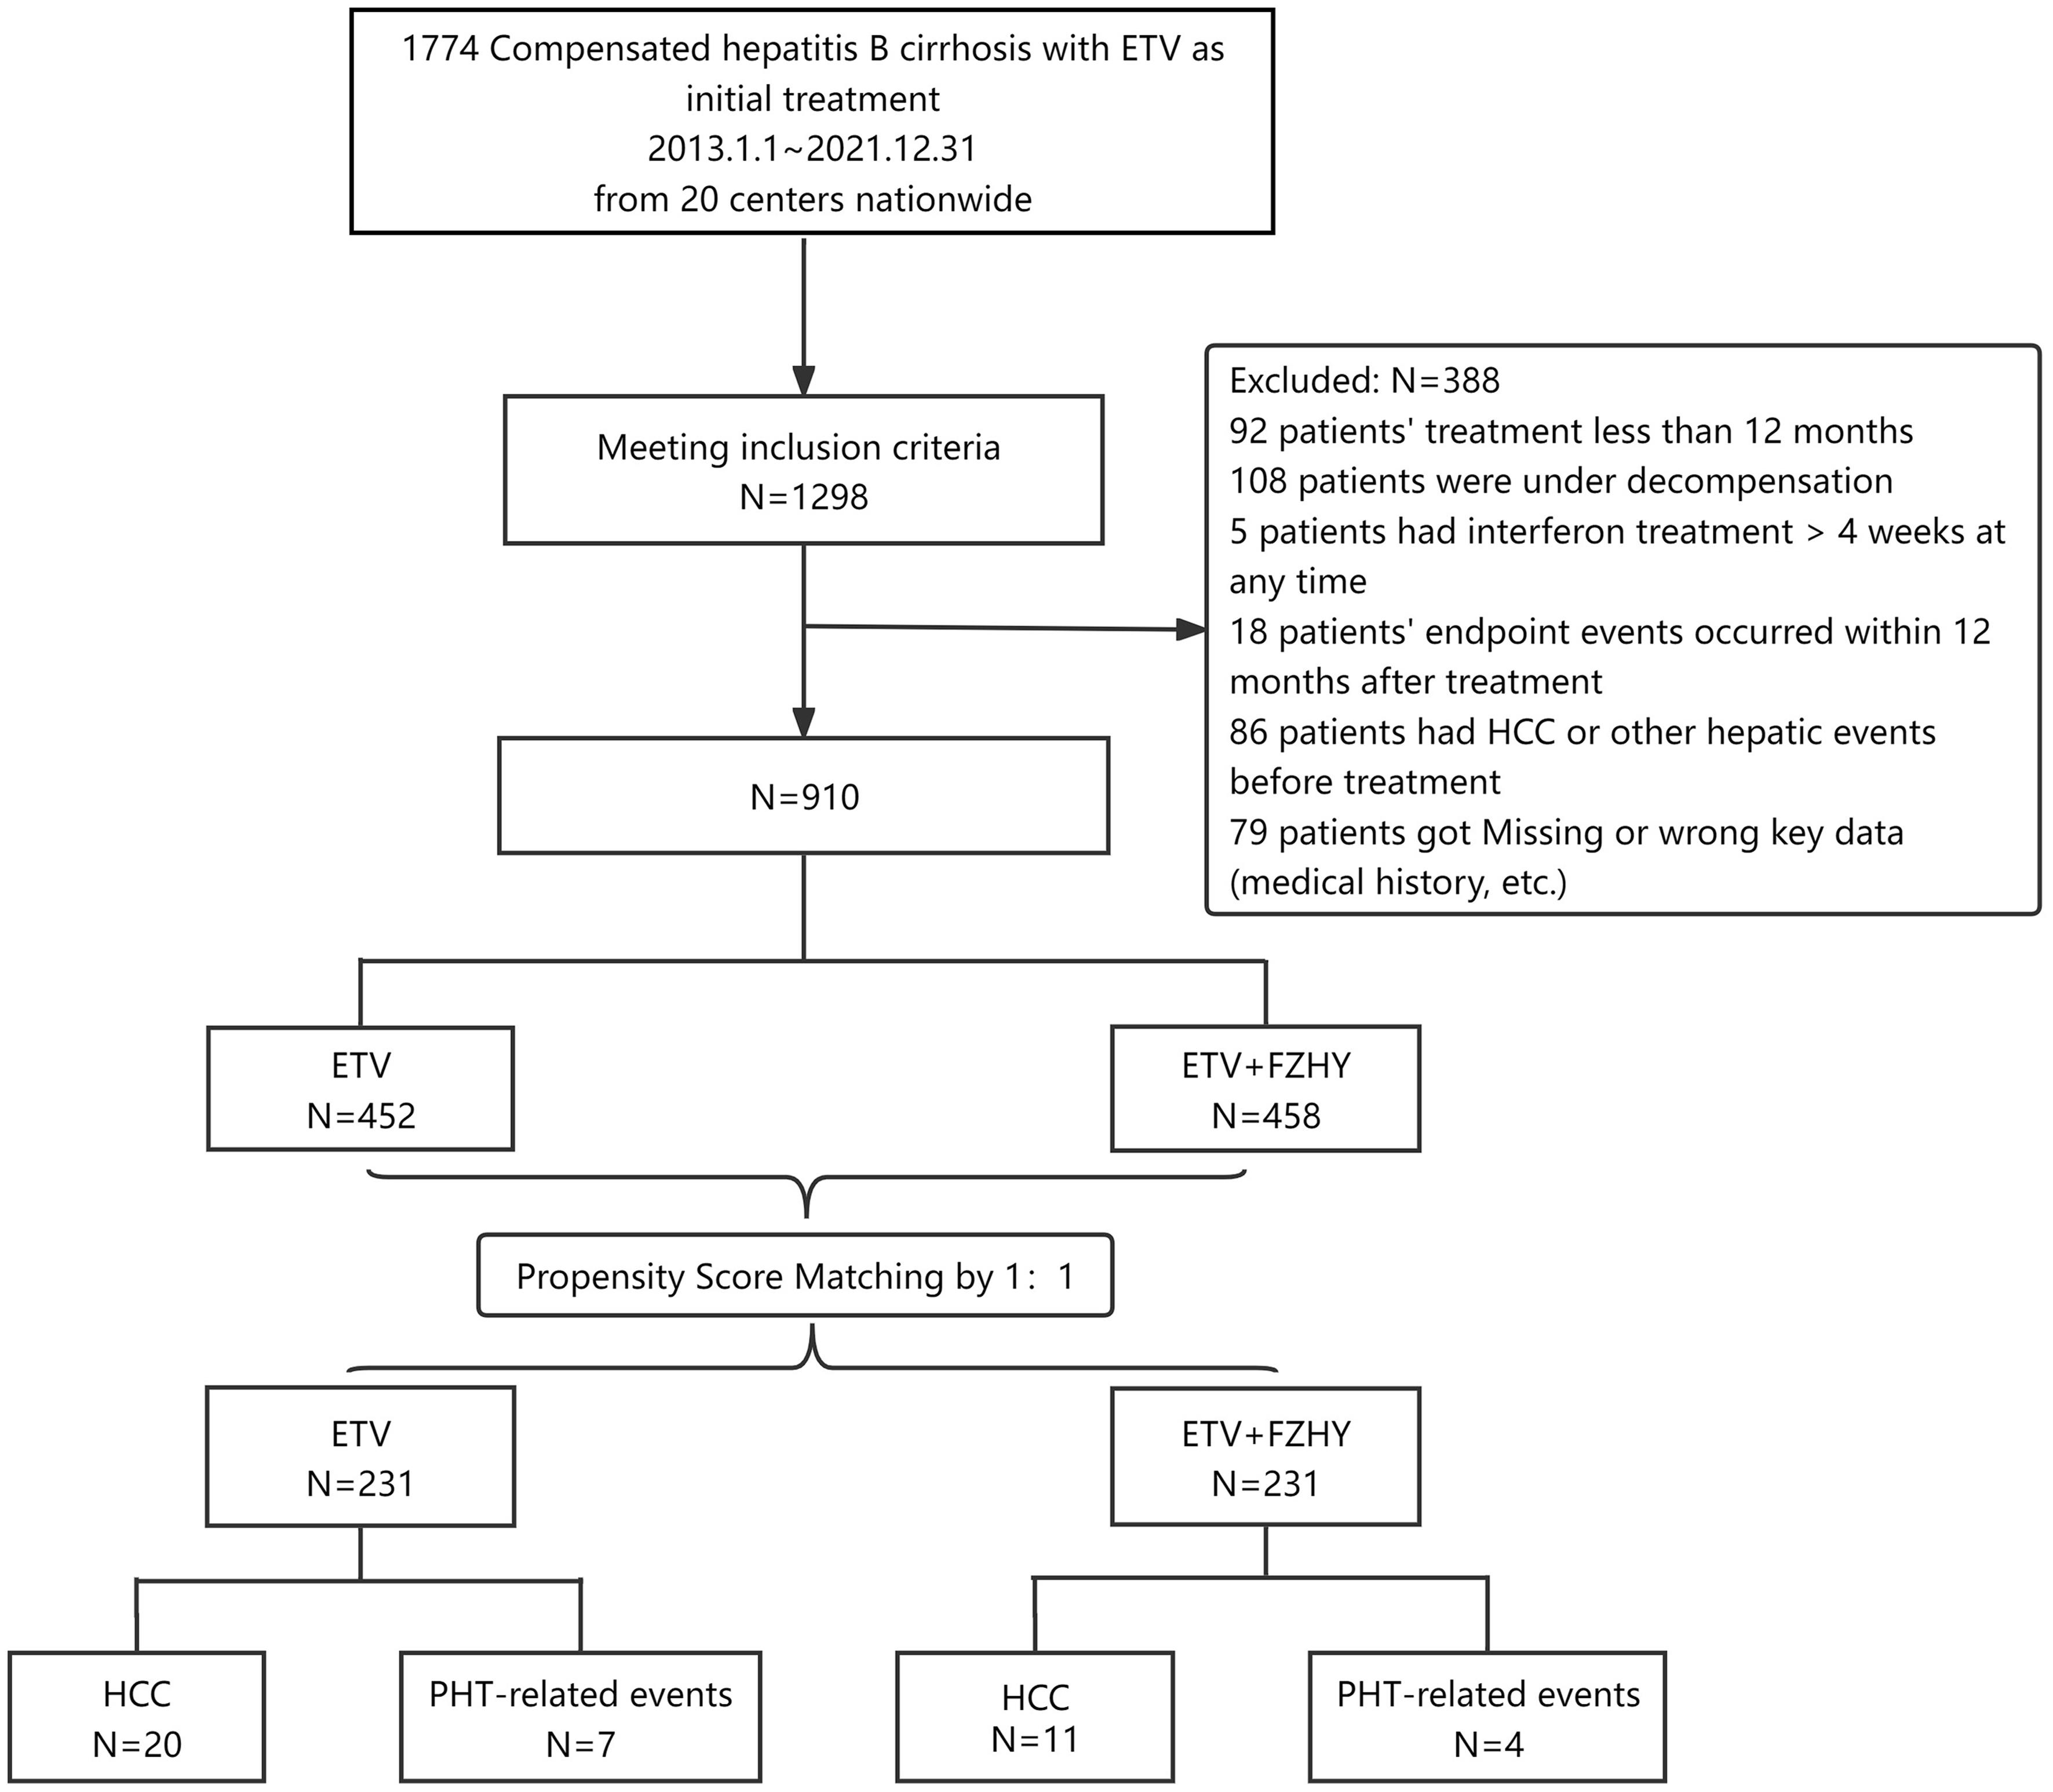 Flowchart of patients with compensated CHB cirrhosis receiving in ETV+FZHY or ETV alone.